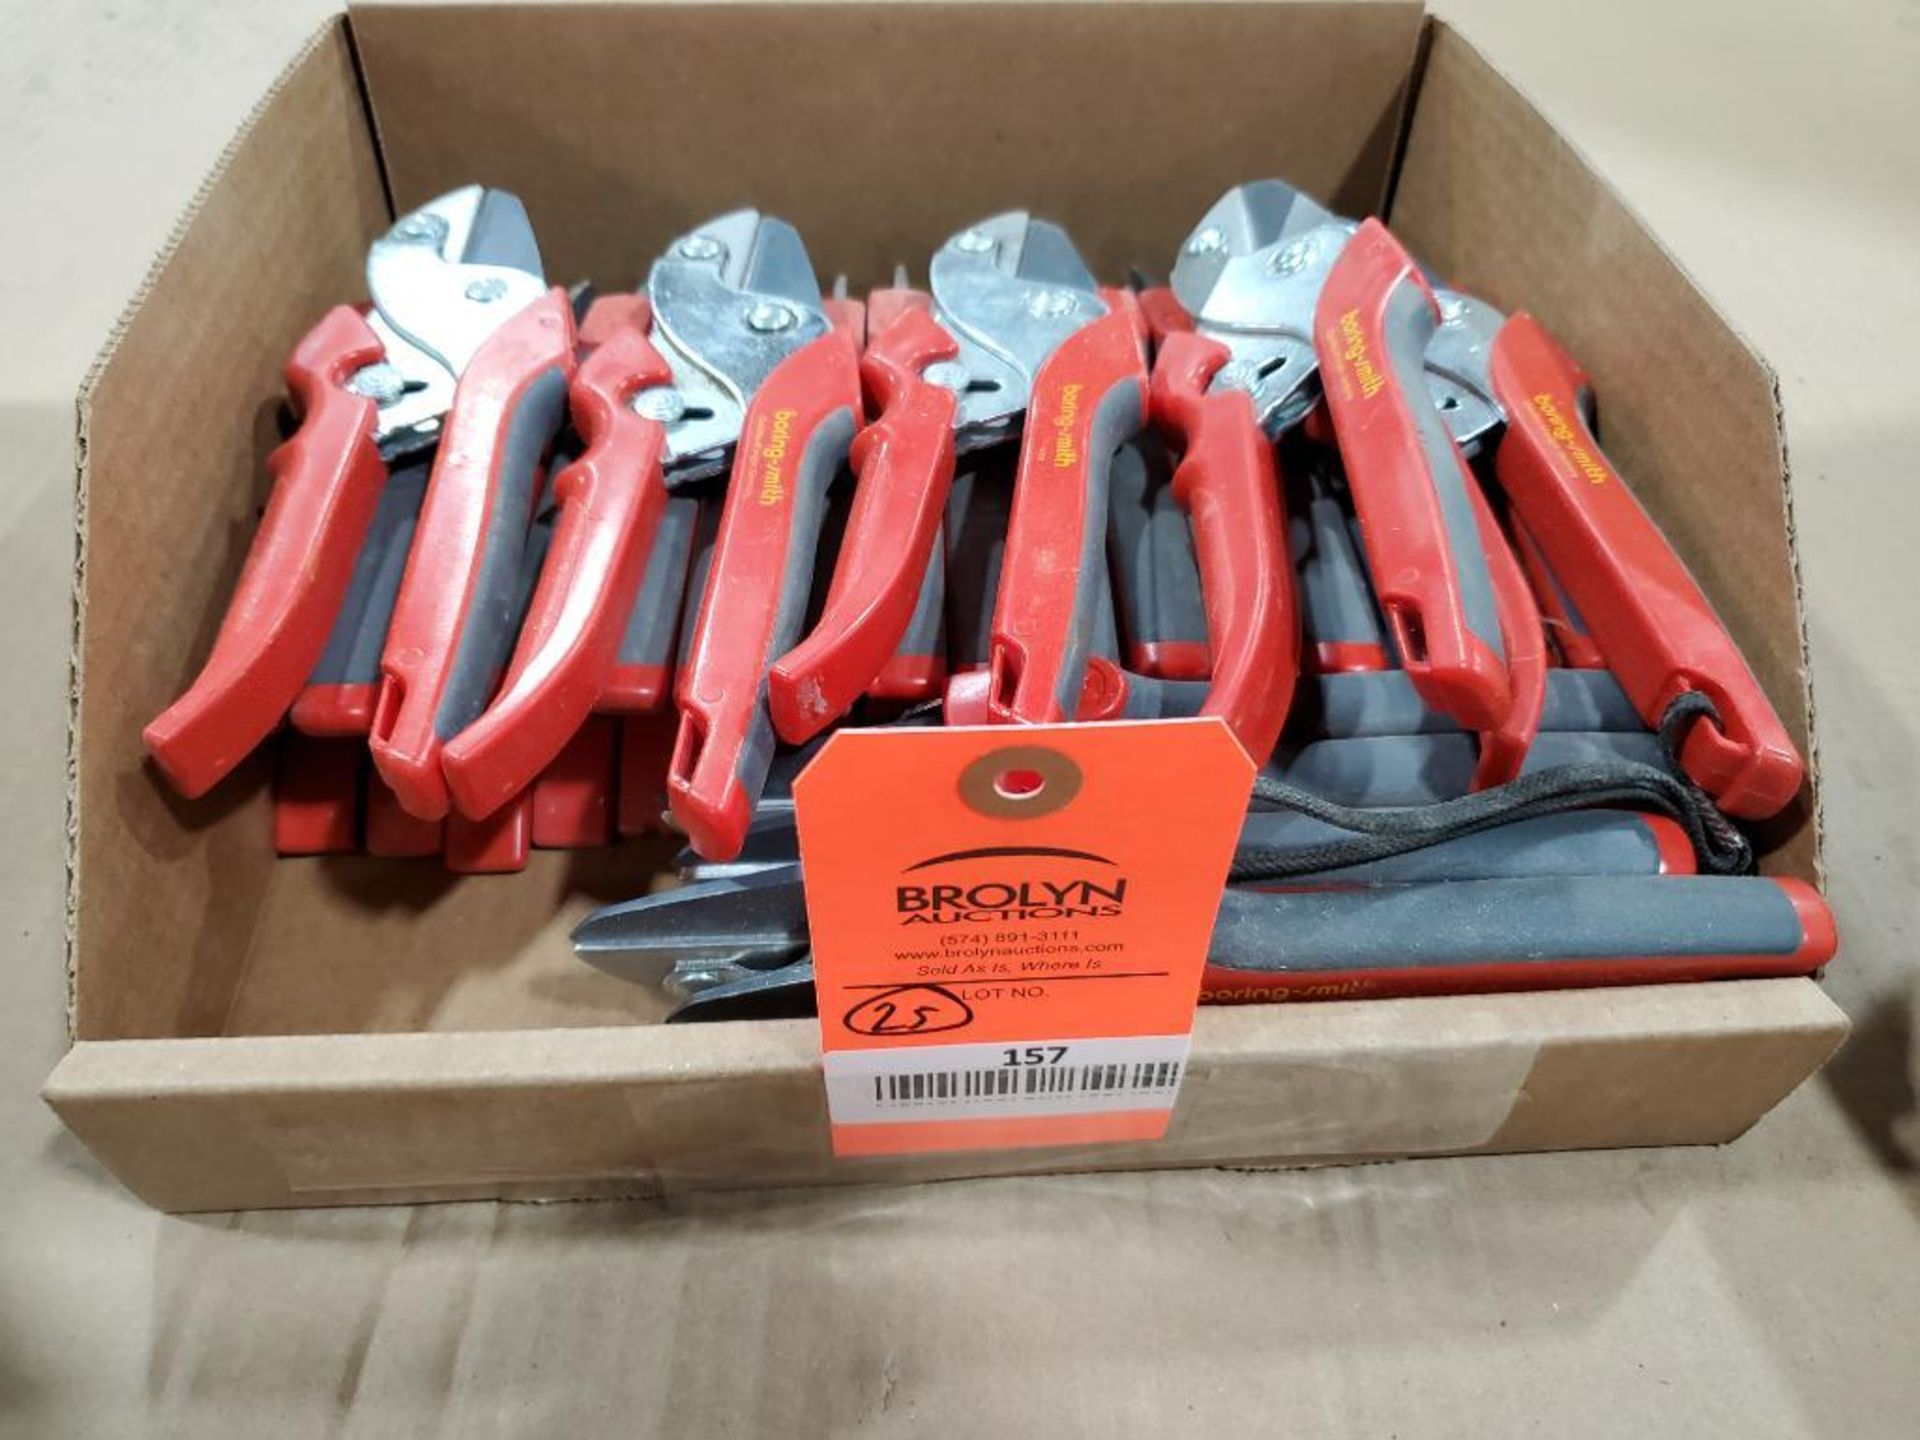 Qty 25 - Boring-Smith anvil pruner cutter.